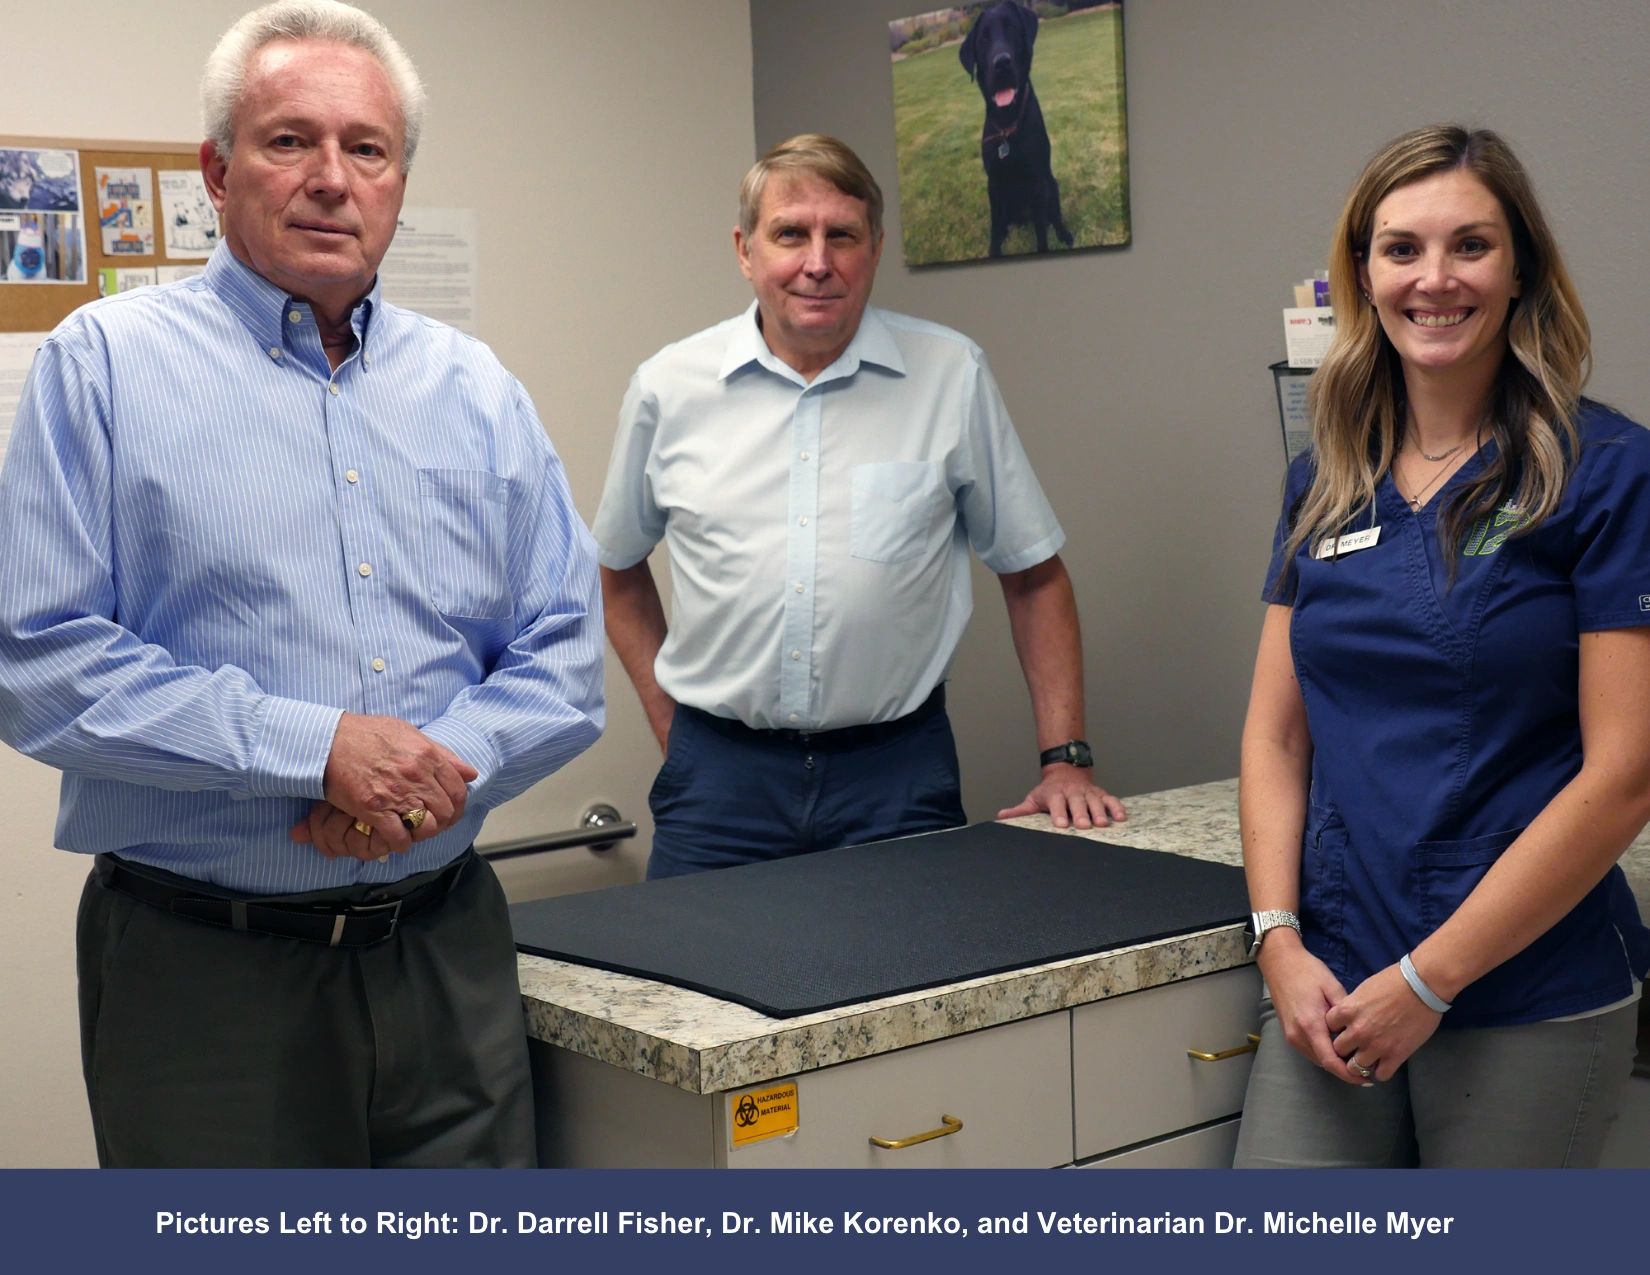 Pictures Left to Right:

Dr. Darrell Fisher, Dr. Mike Korenko, and
Veterinarian Dr. Michelle Myer 